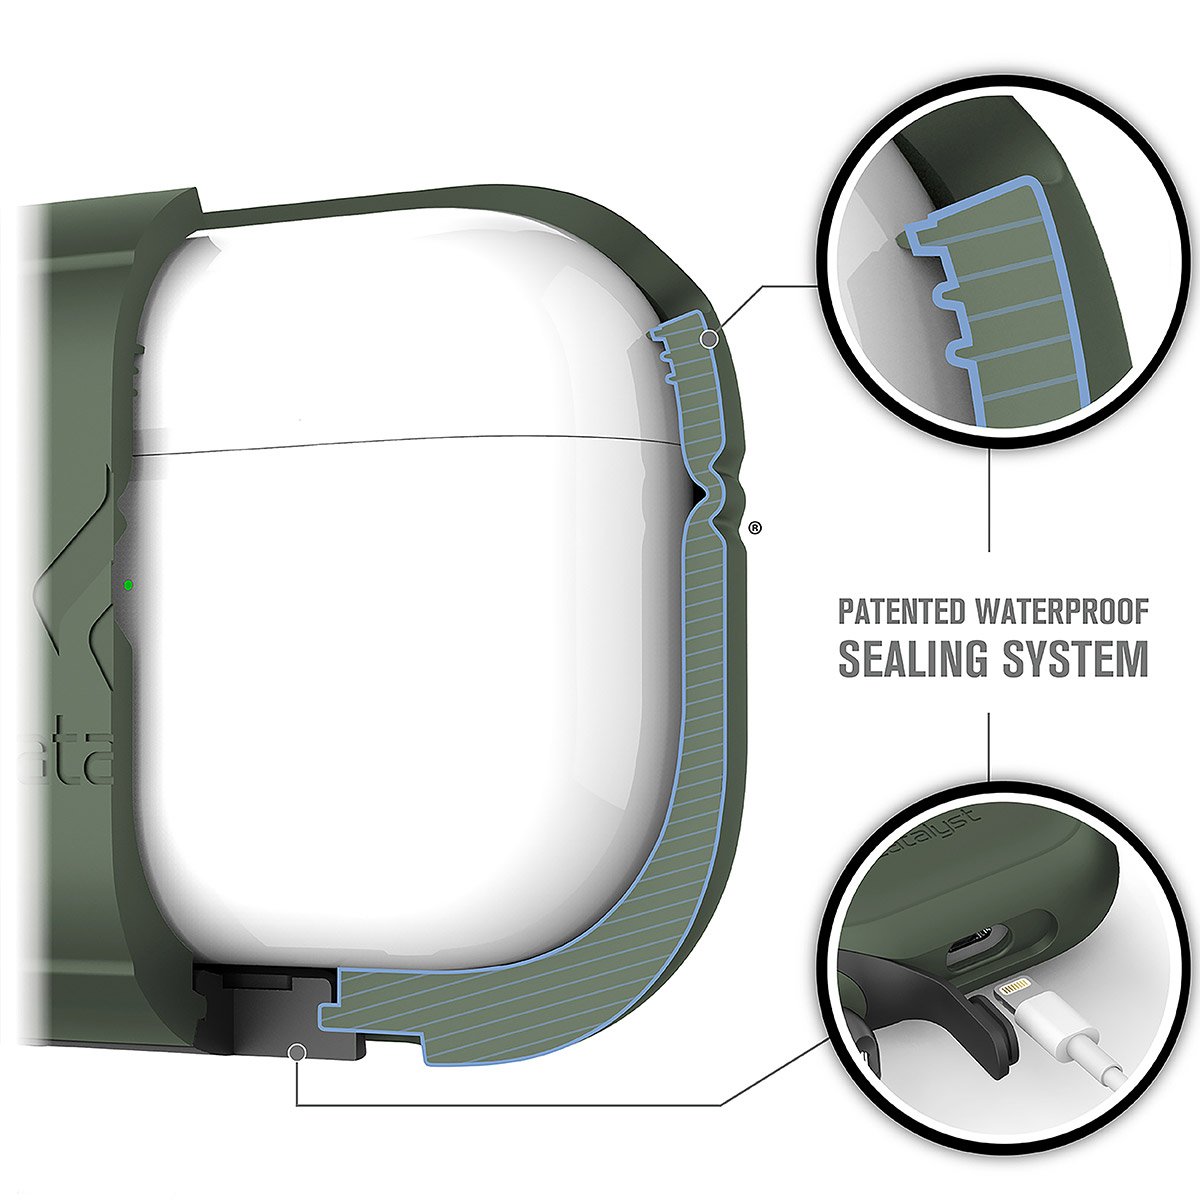 CATAPDPROGRN | catalyst airpods pro gen 2 1 waterproof case carabiner army green showing the patented waterproof sealing system texts reads patented waterproof sealing system